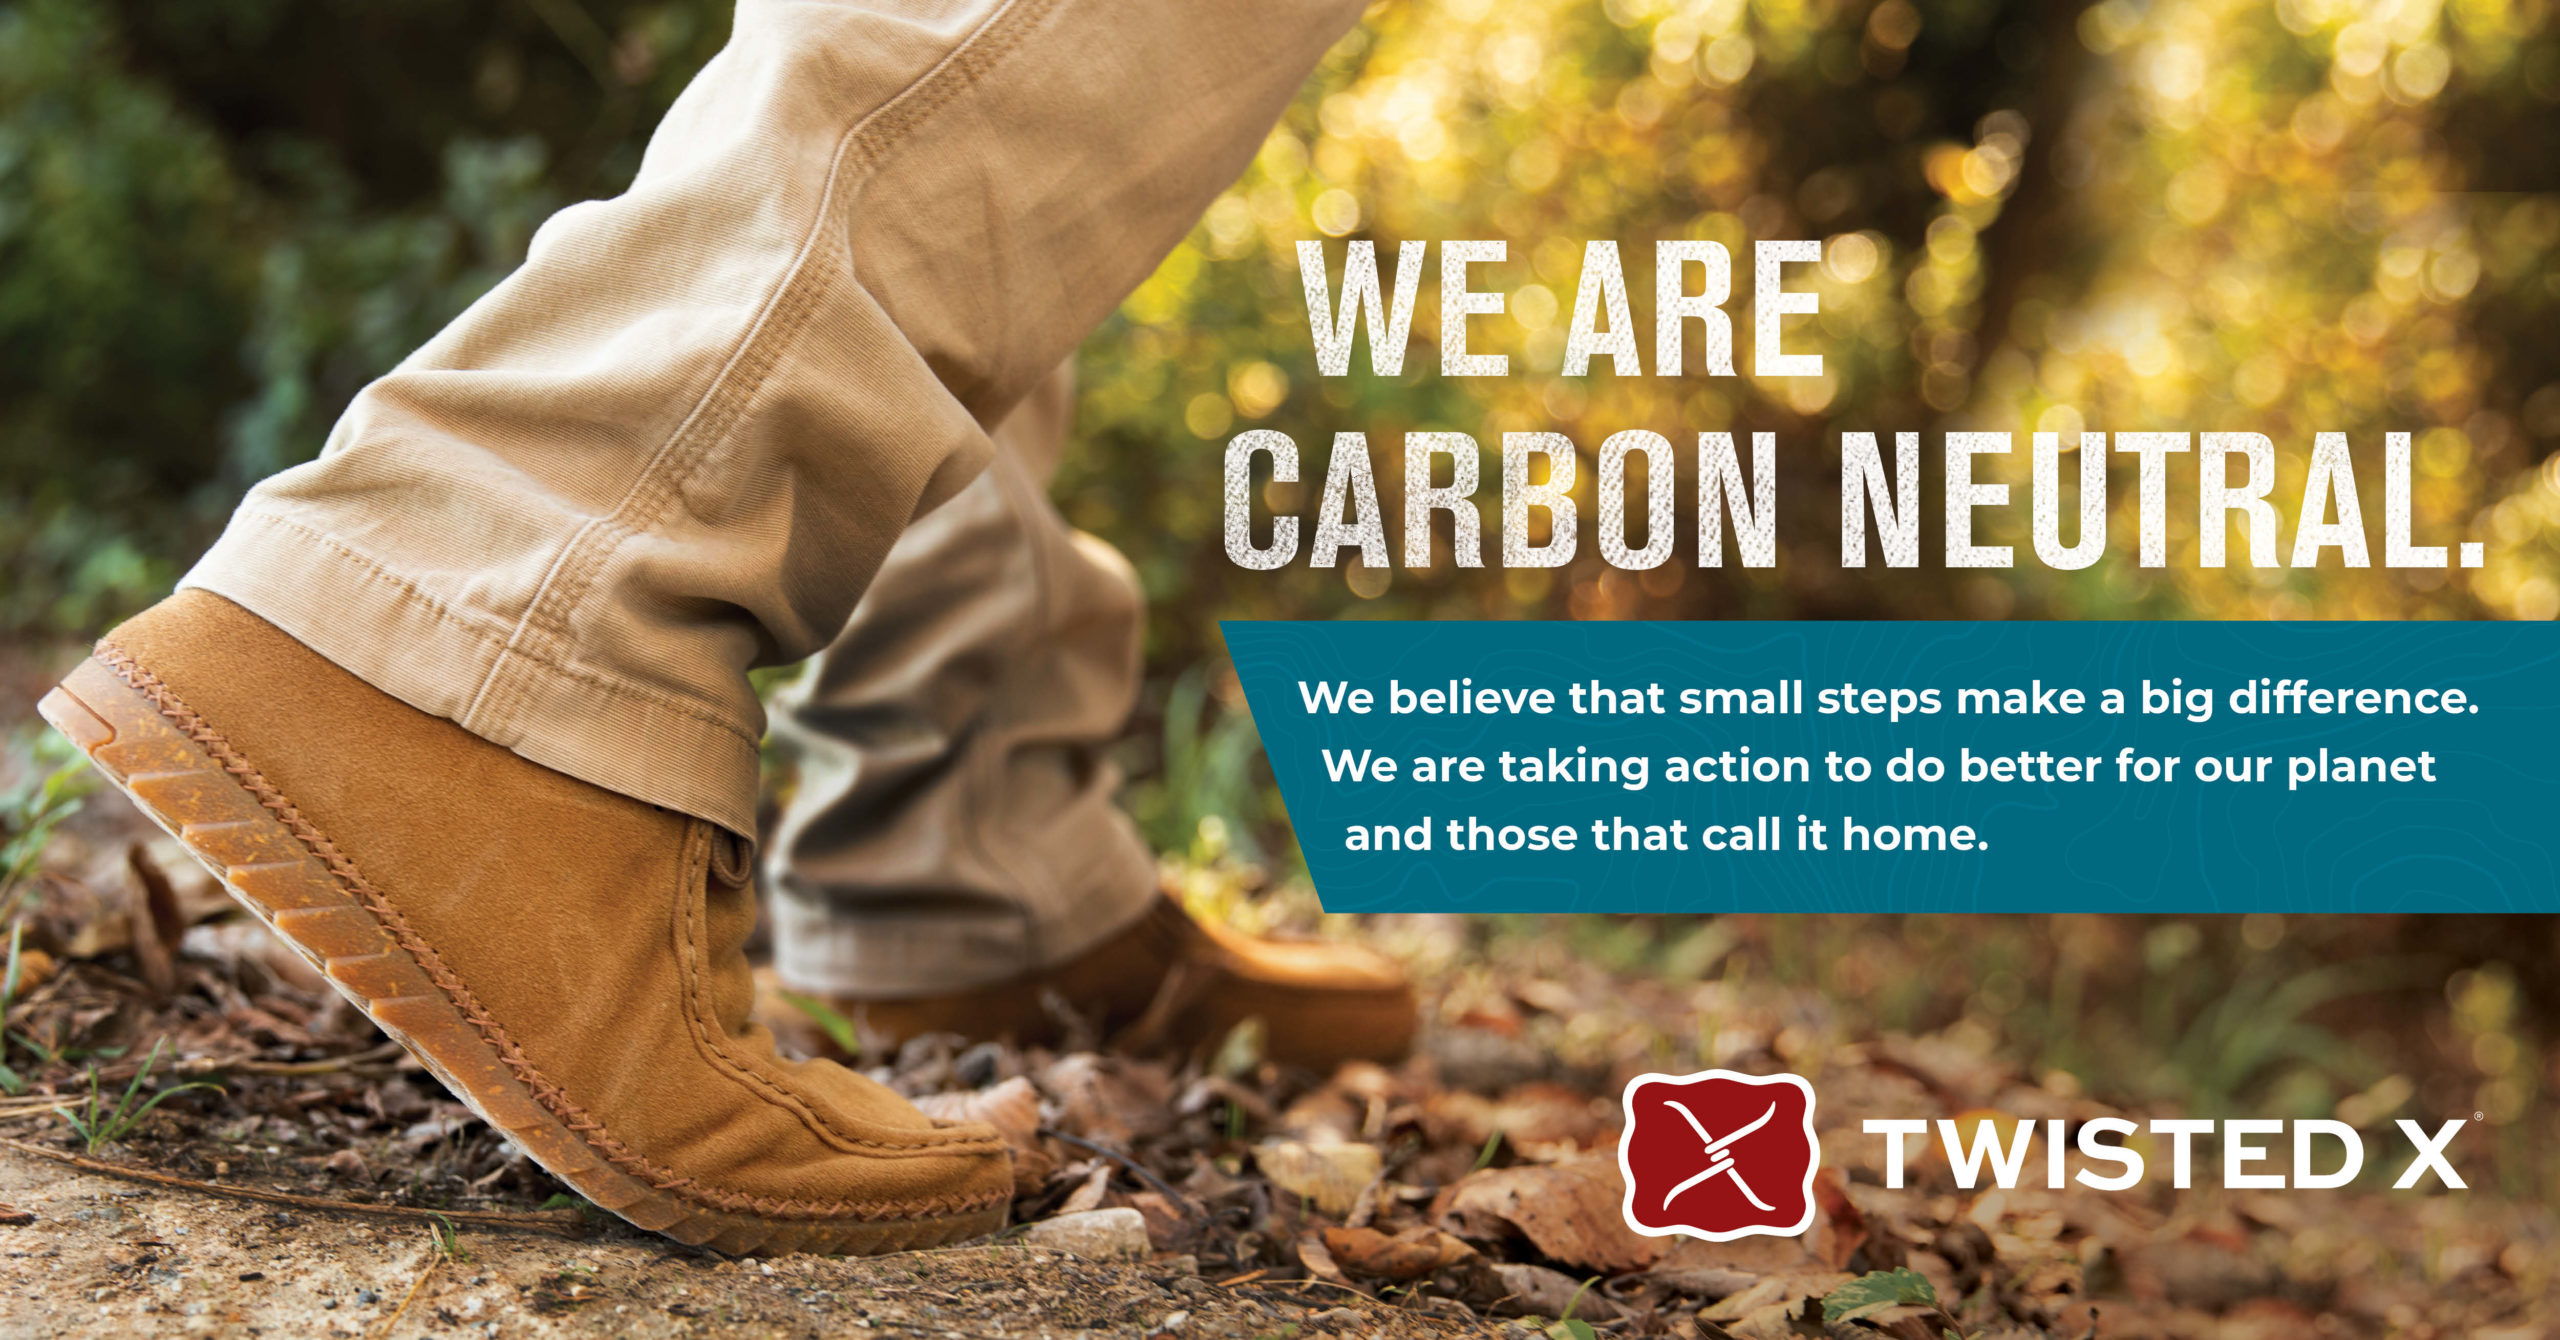 Twisted X® Reaches Carbon Neutrality, Continuing Quantifiable Impact To Better The Environment